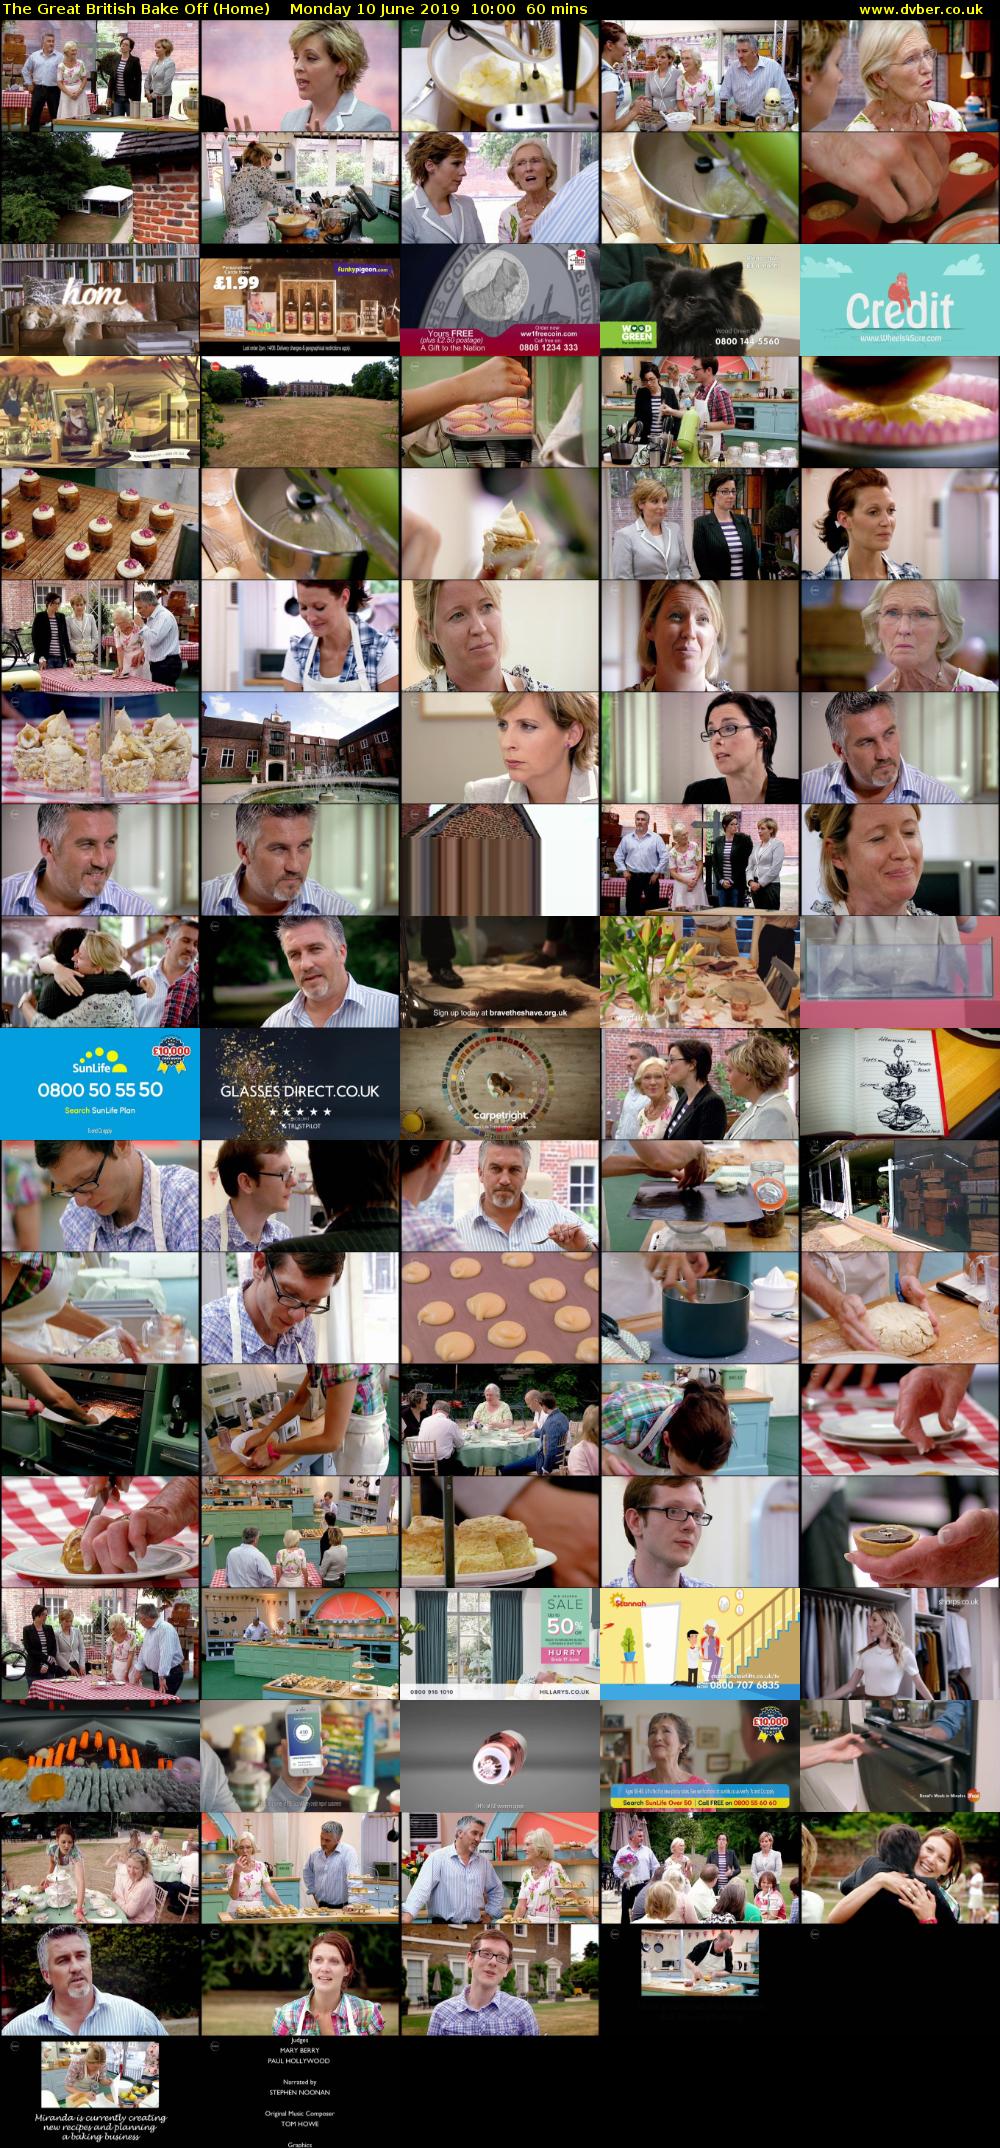 The Great British Bake Off (Home) Monday 10 June 2019 10:00 - 11:00